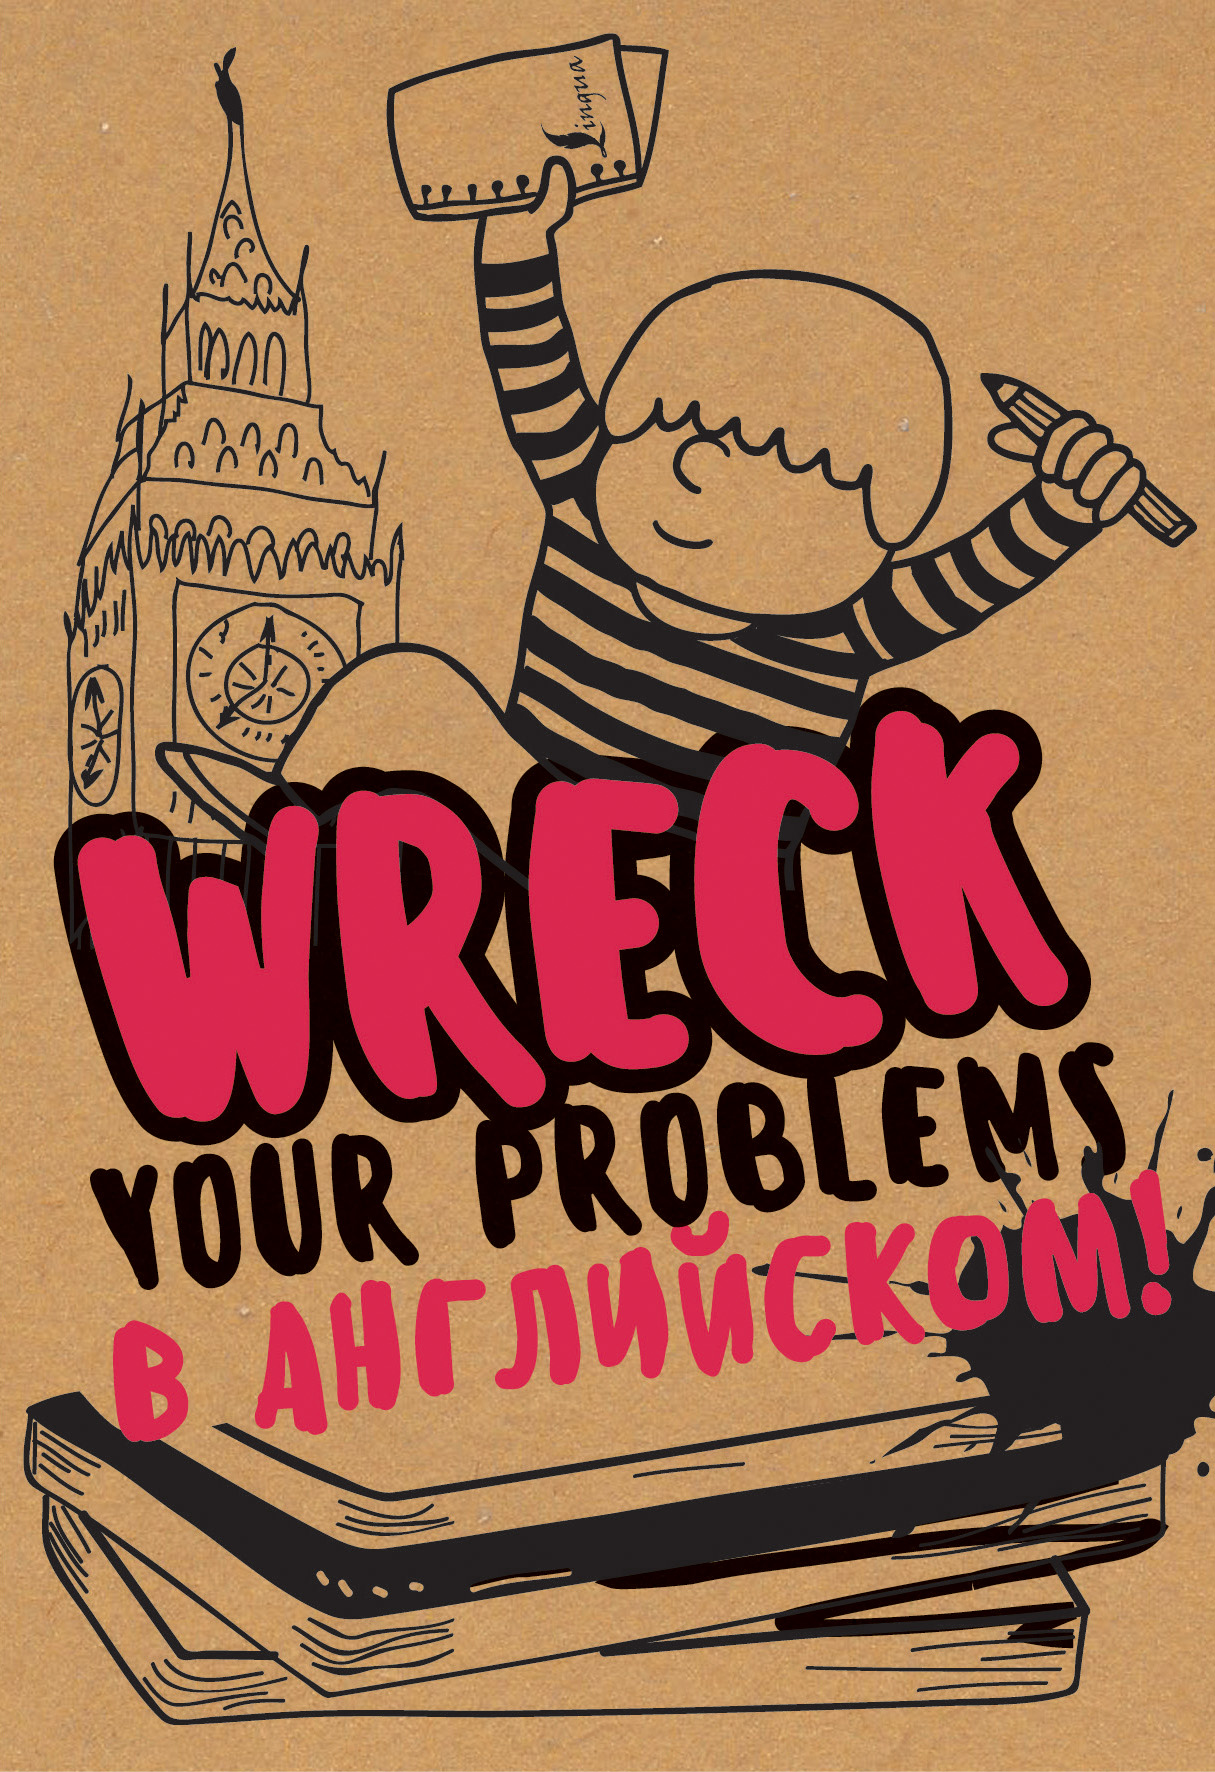 Wreck your problems   ! /     . Wreck it!